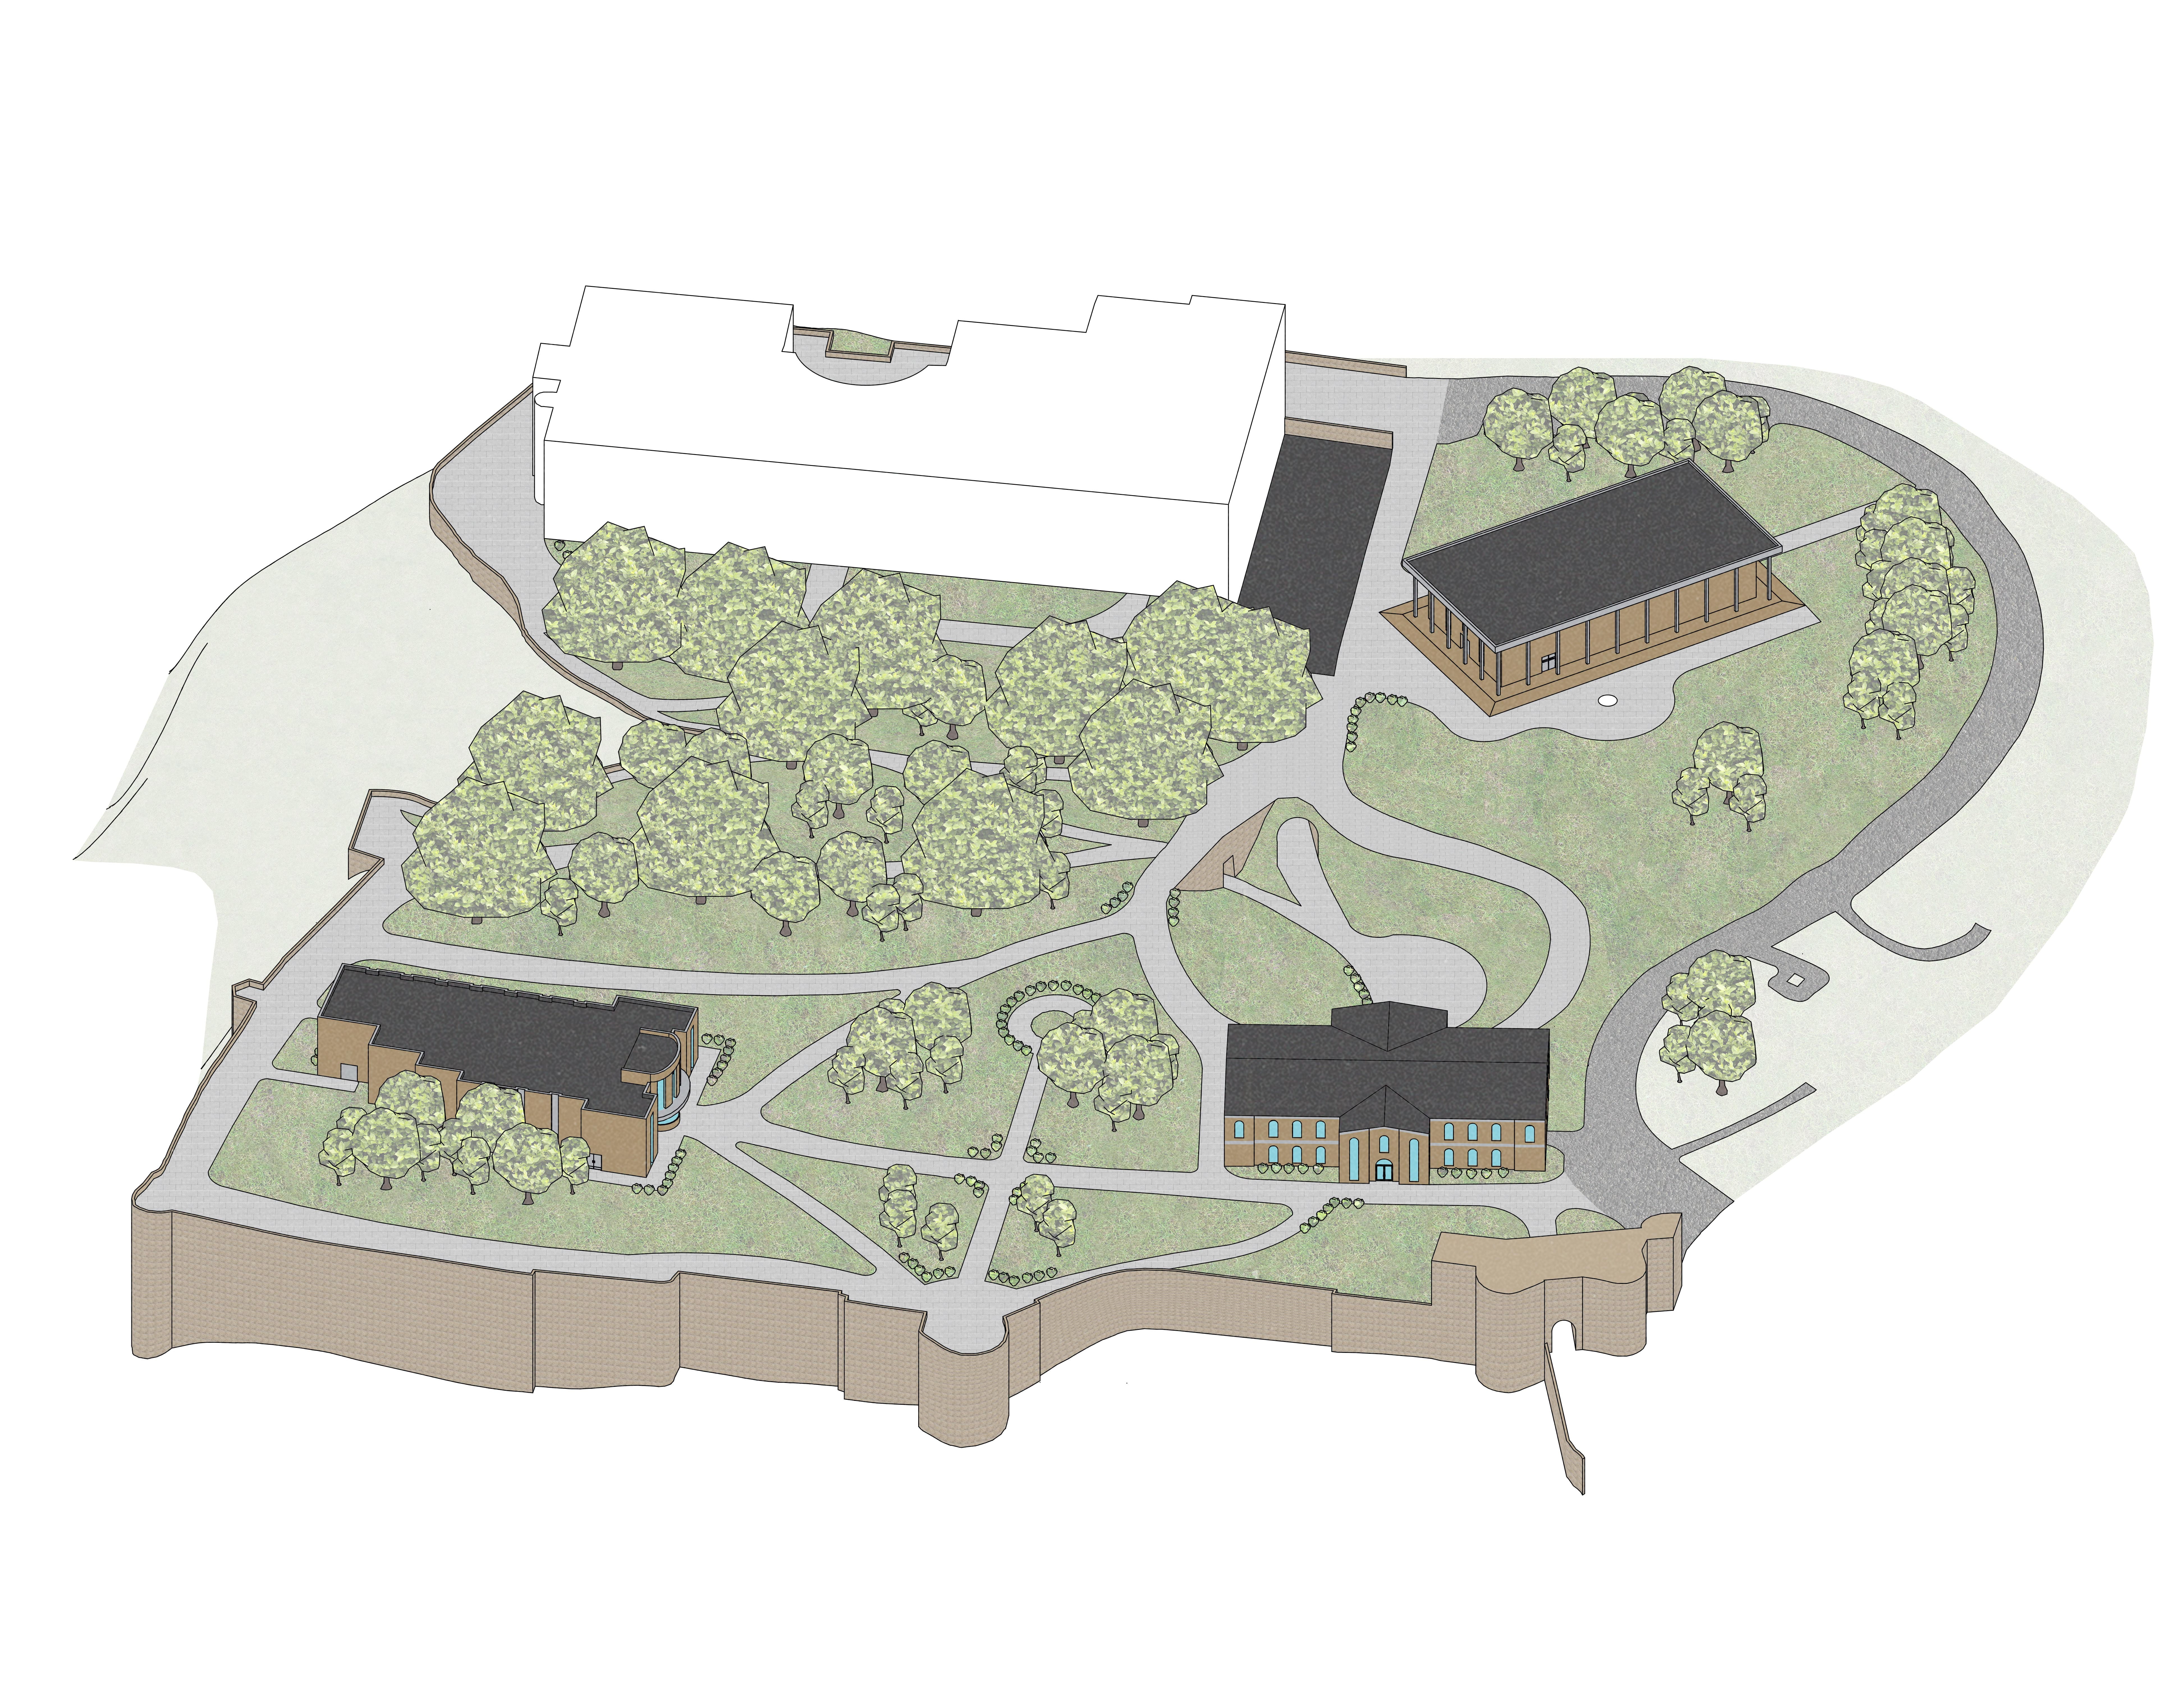 3d Axonometric Drawing of the Complete Site